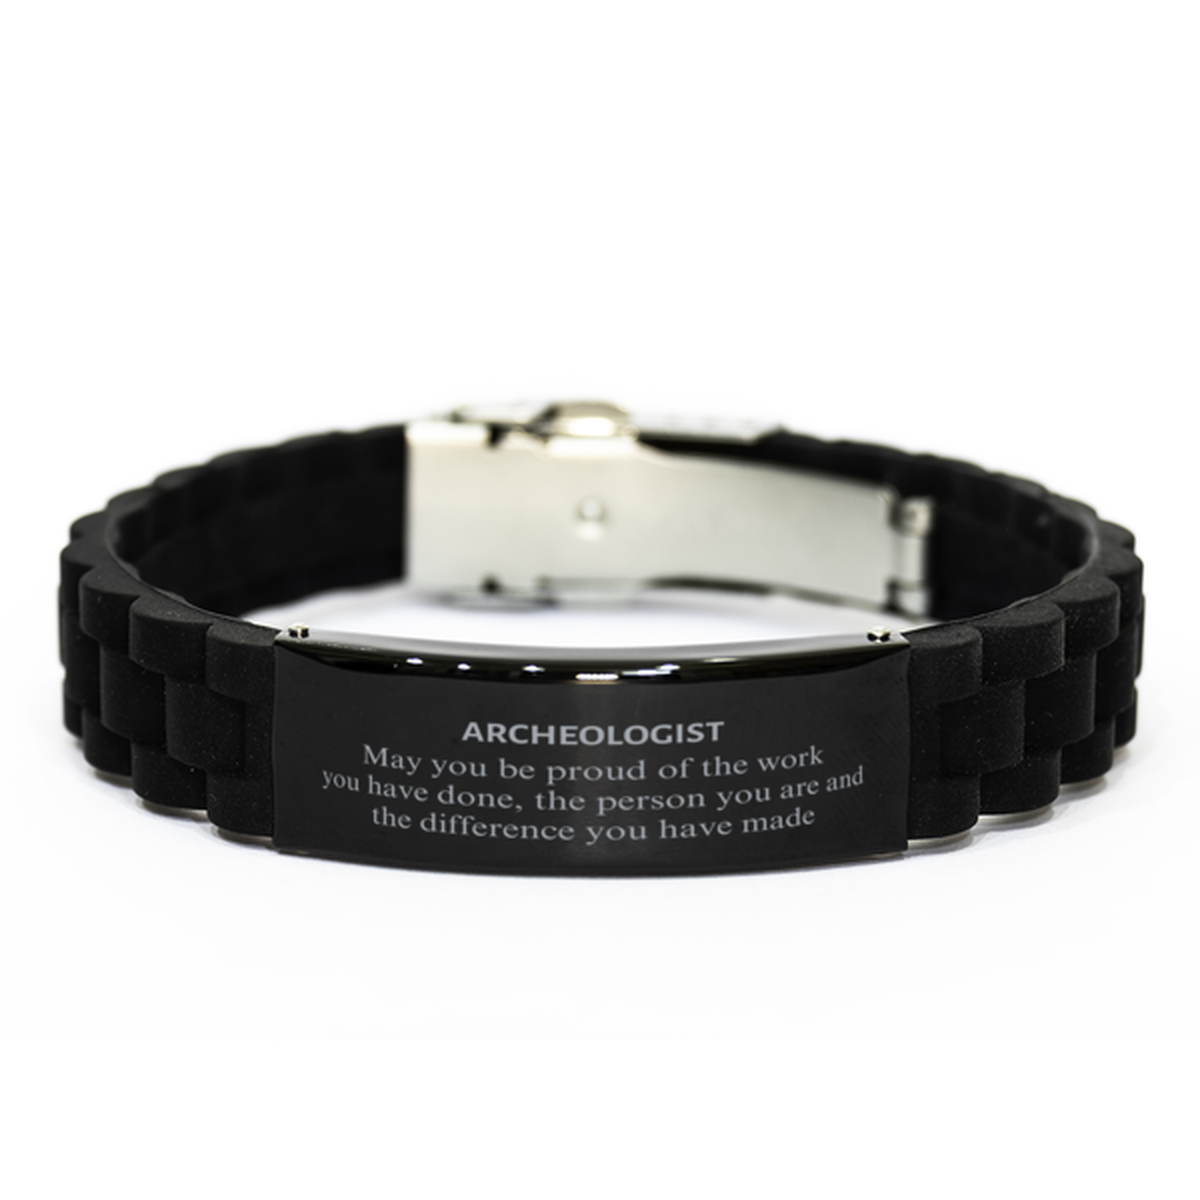 Archeologist May you be proud of the work you have done, Retirement Archeologist Black Glidelock Clasp Bracelet for Colleague Appreciation Gifts Amazing for Archeologist